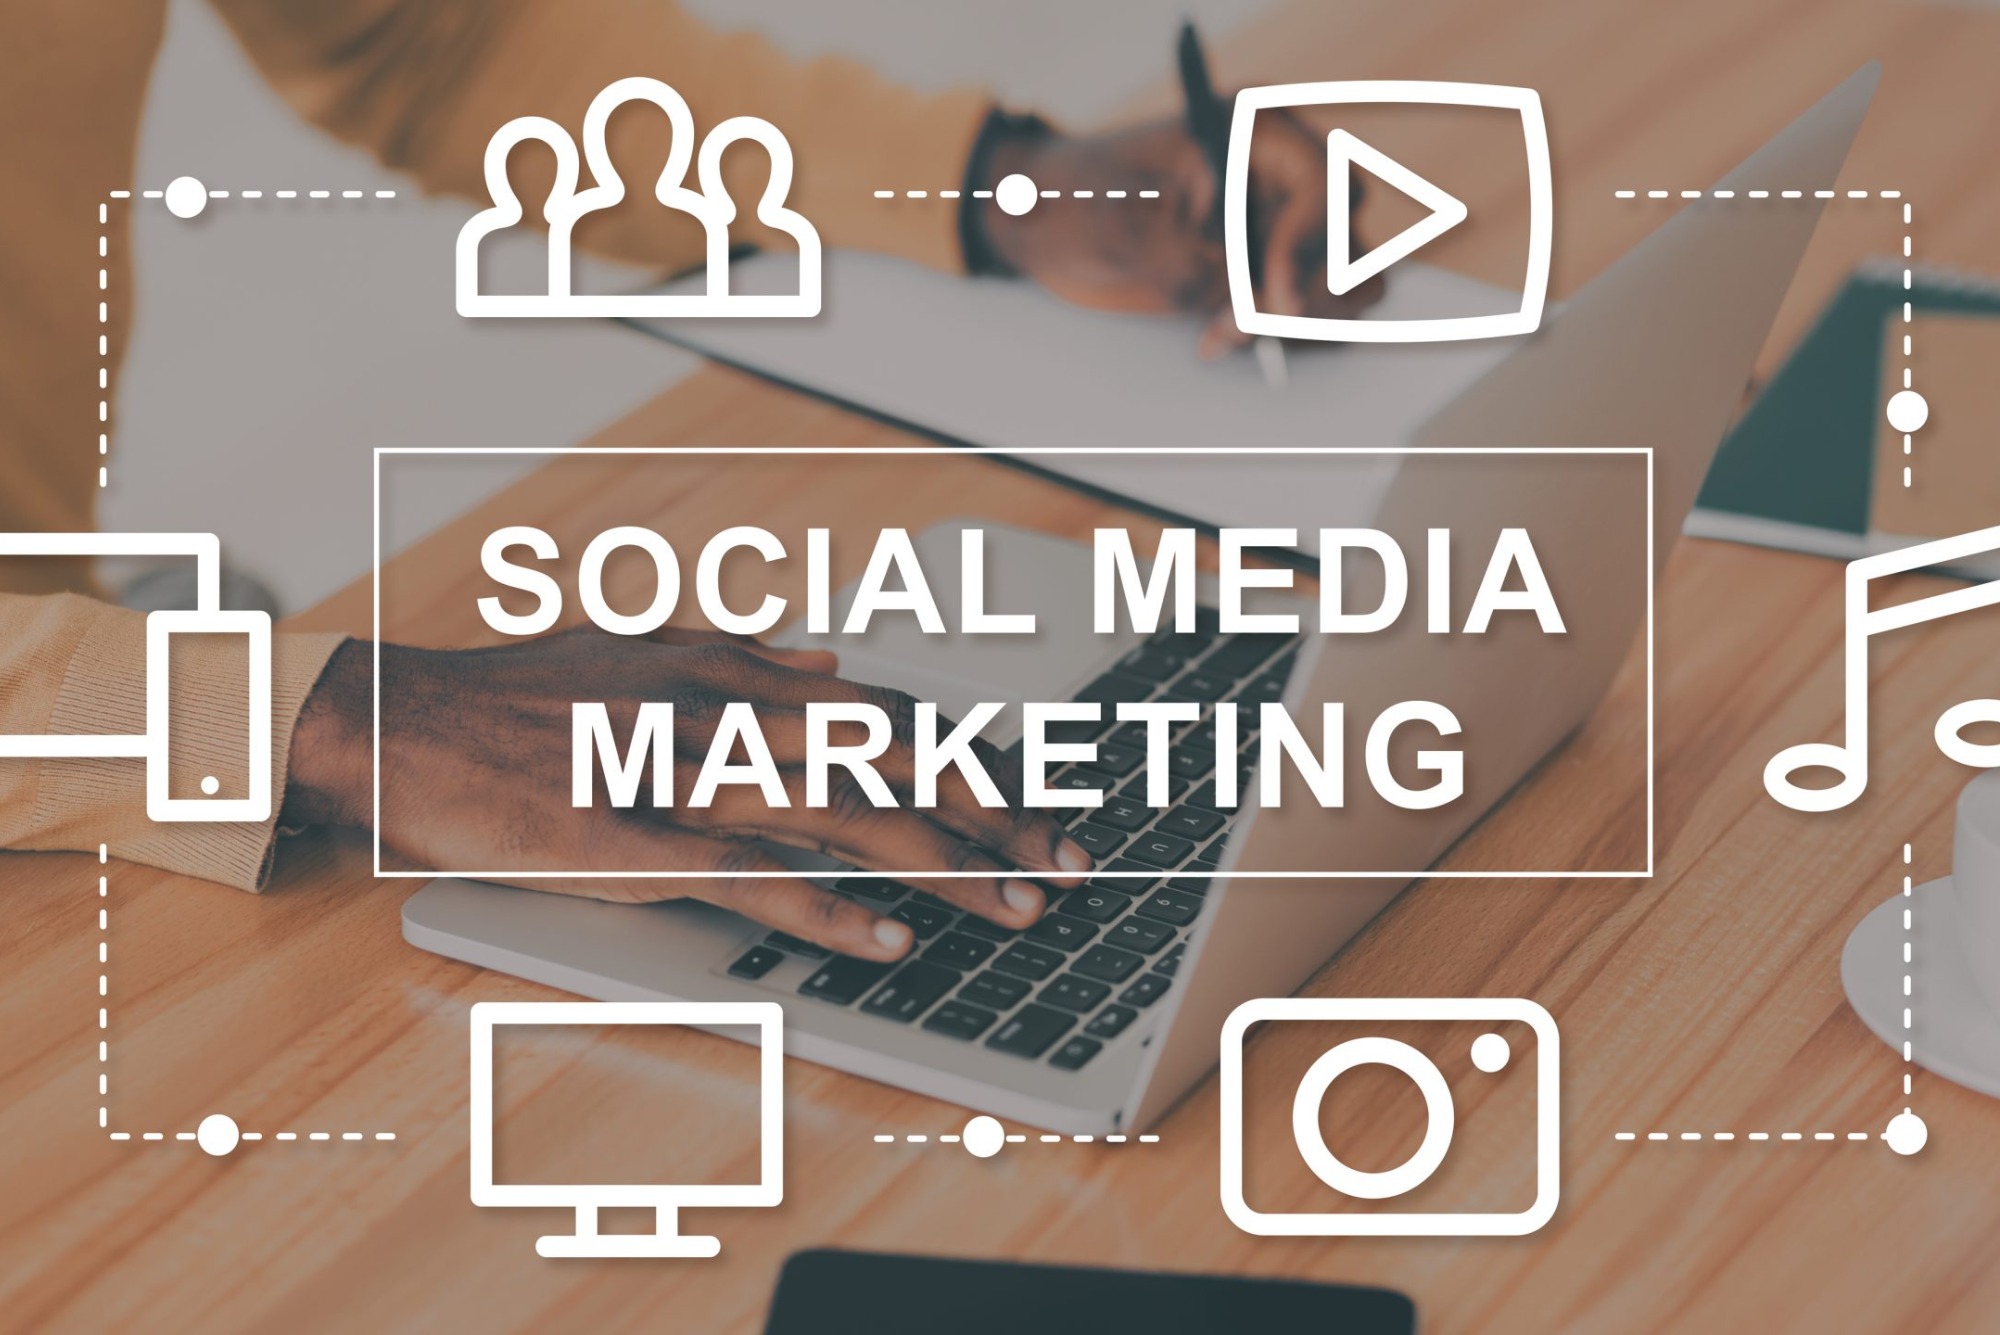 What Do You Mean by Social Media Marketing